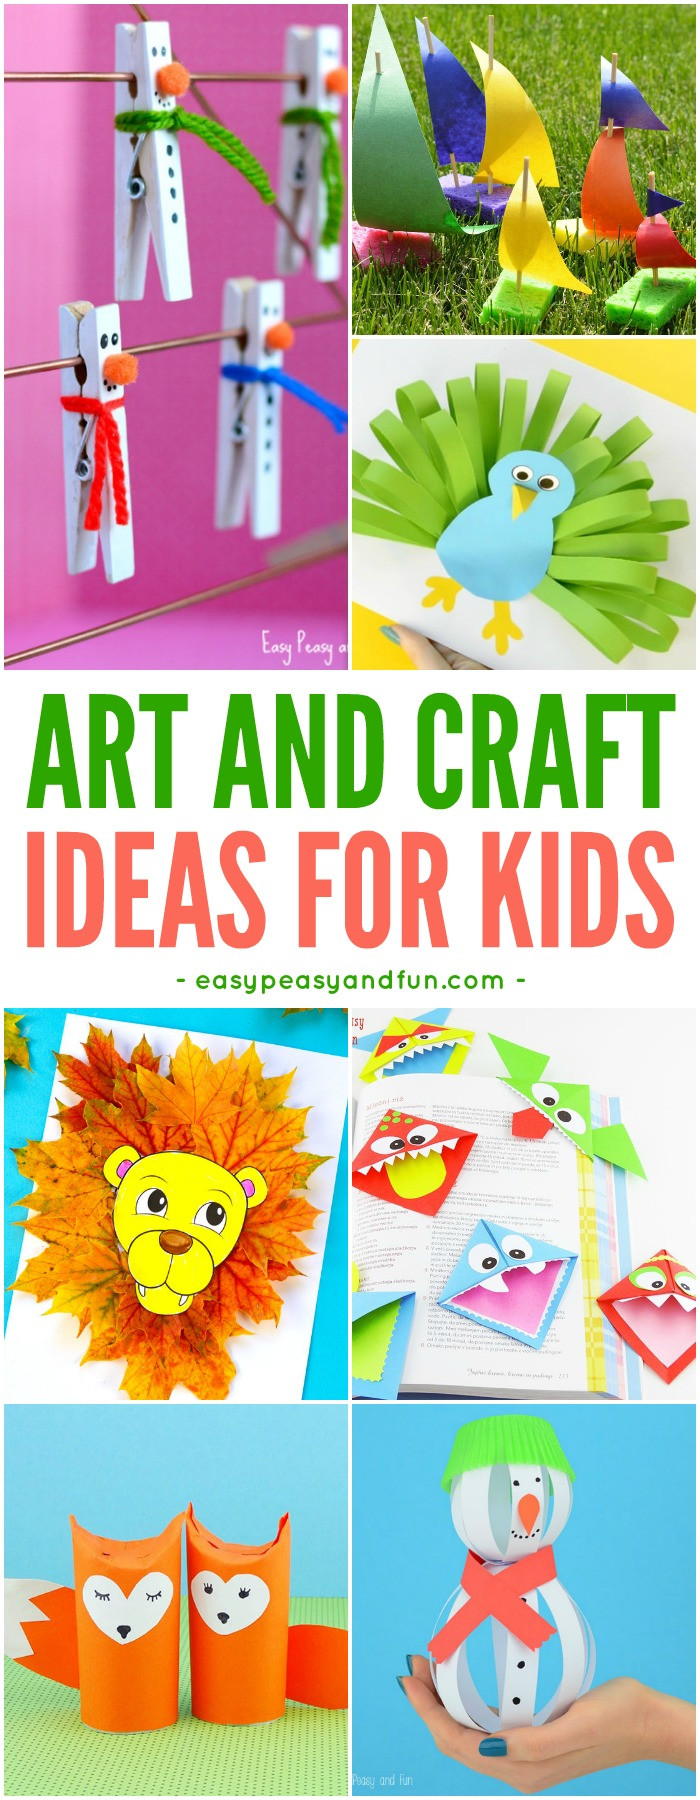 Art Project Ideas For Kids
 Crafts For Kids Tons of Art and Craft Ideas for Kids to